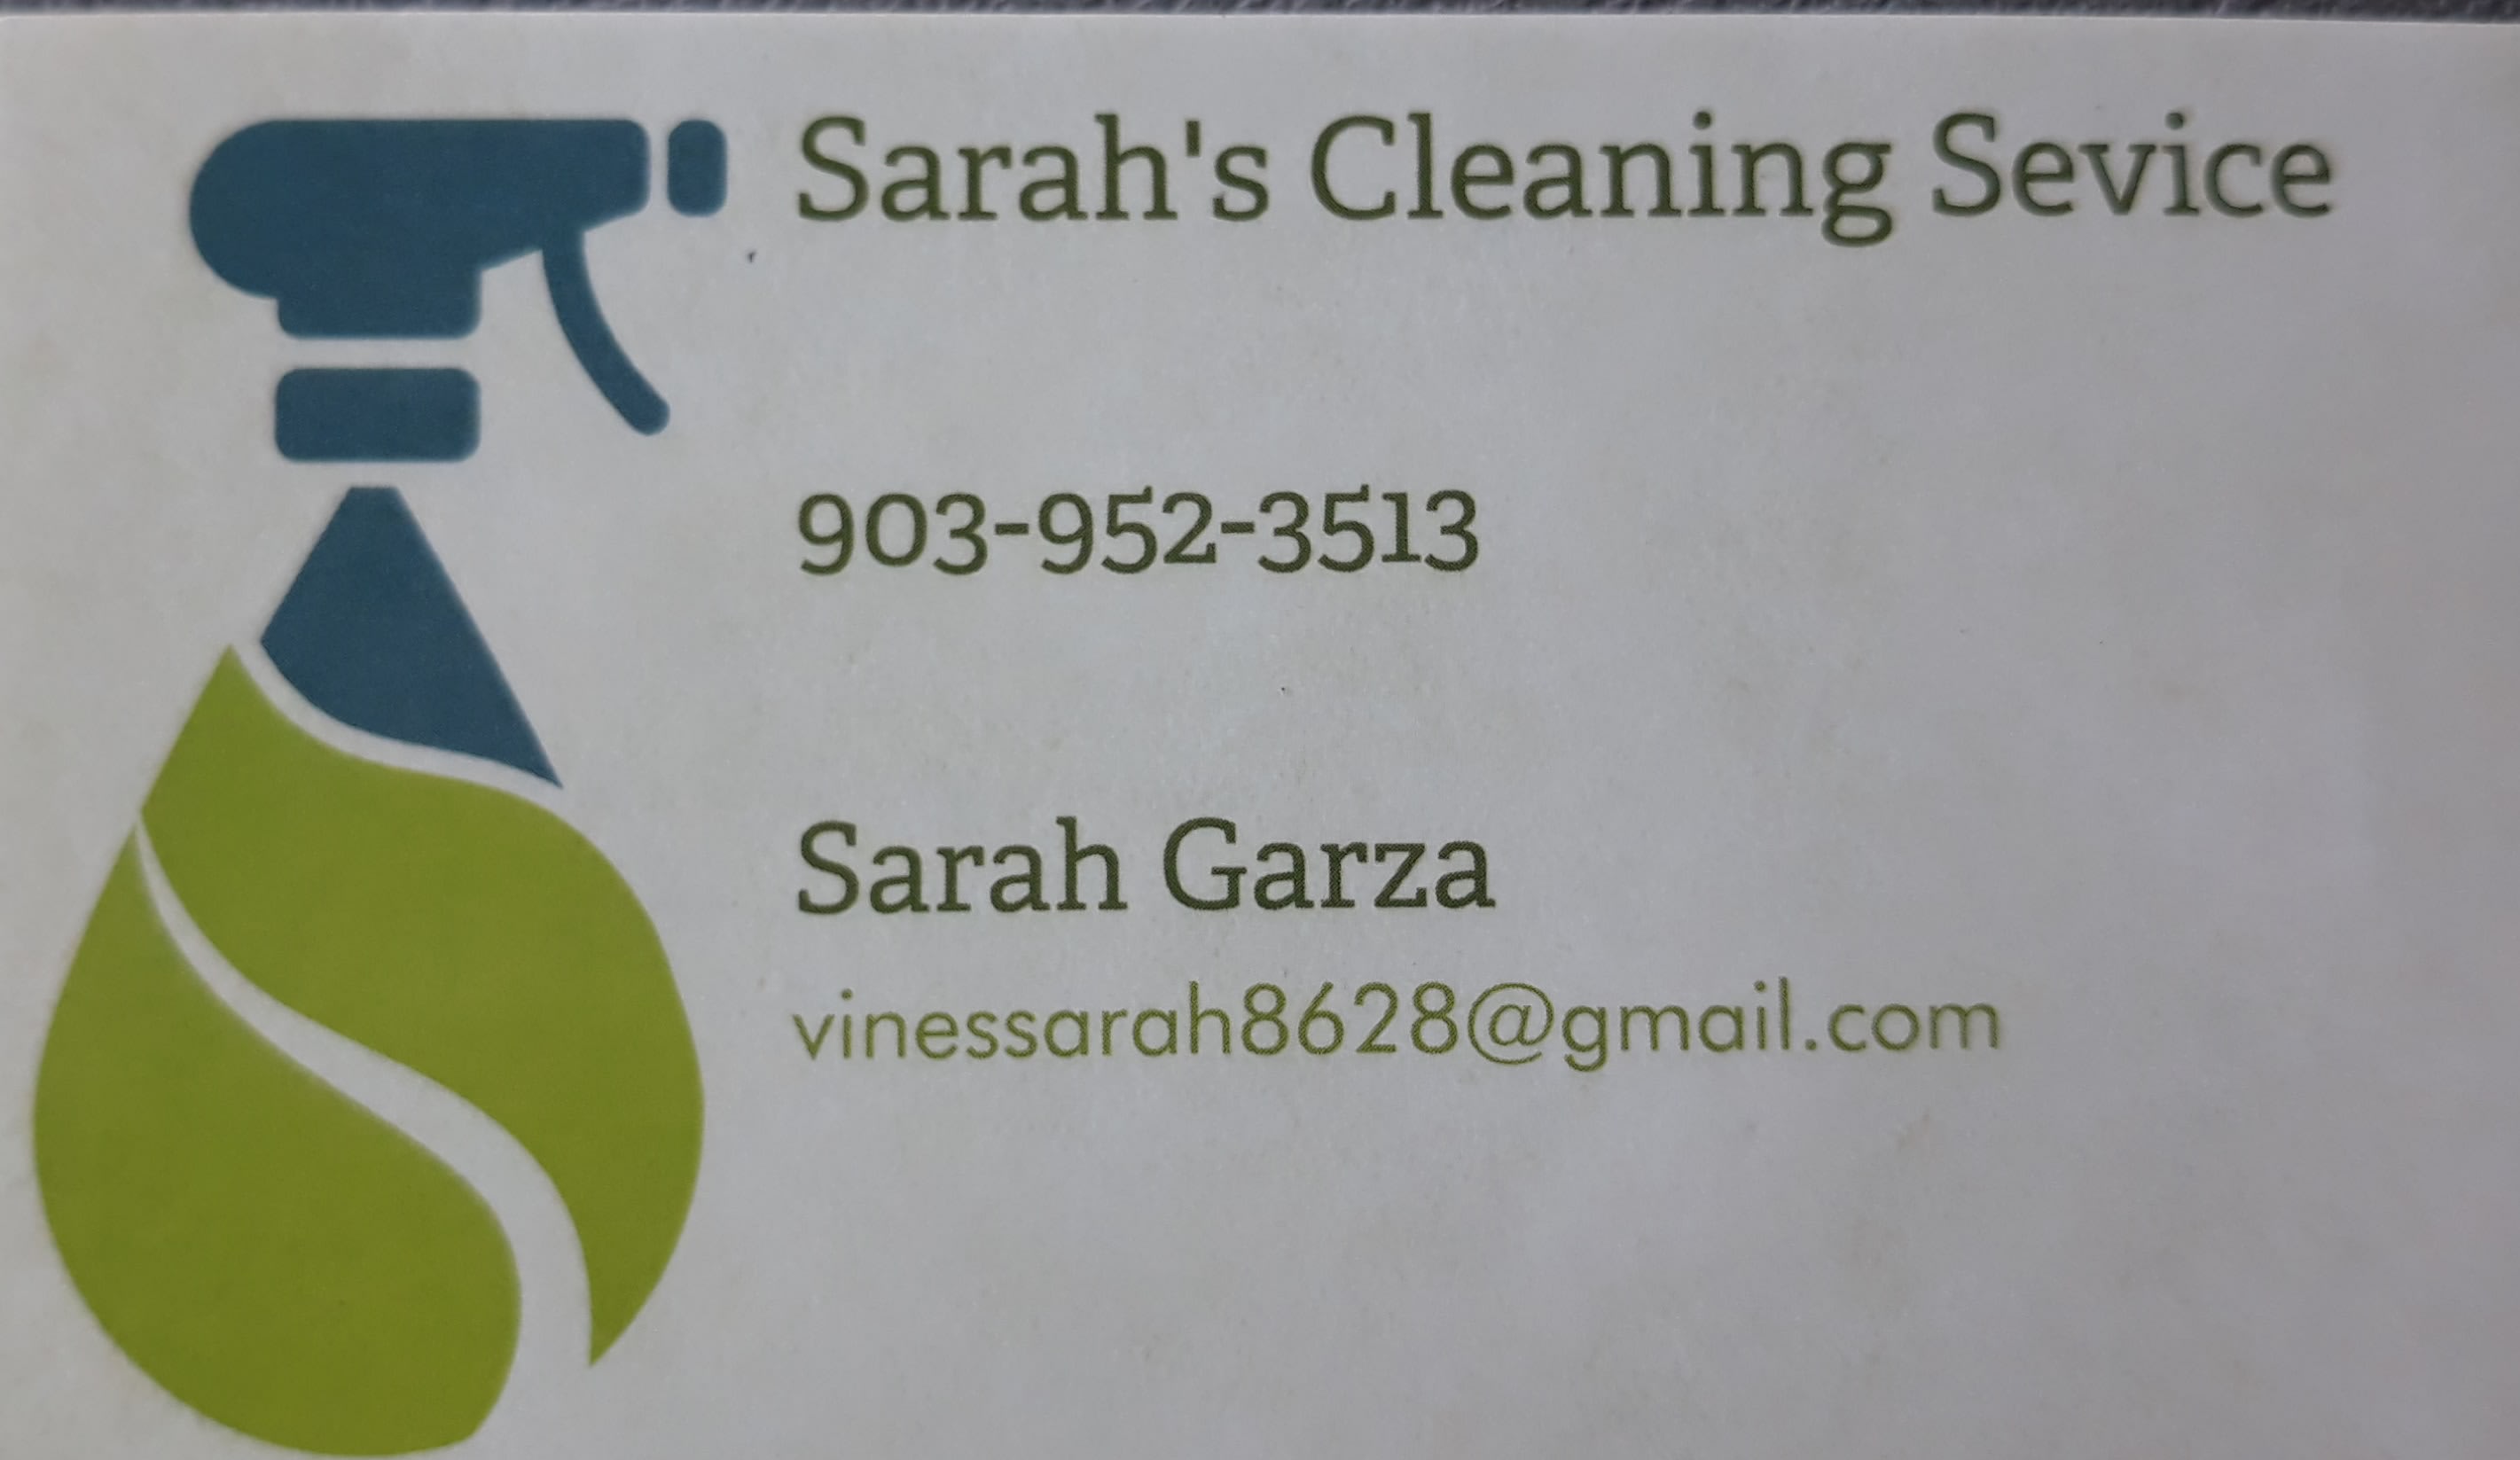 Sarah's Cleaning Service